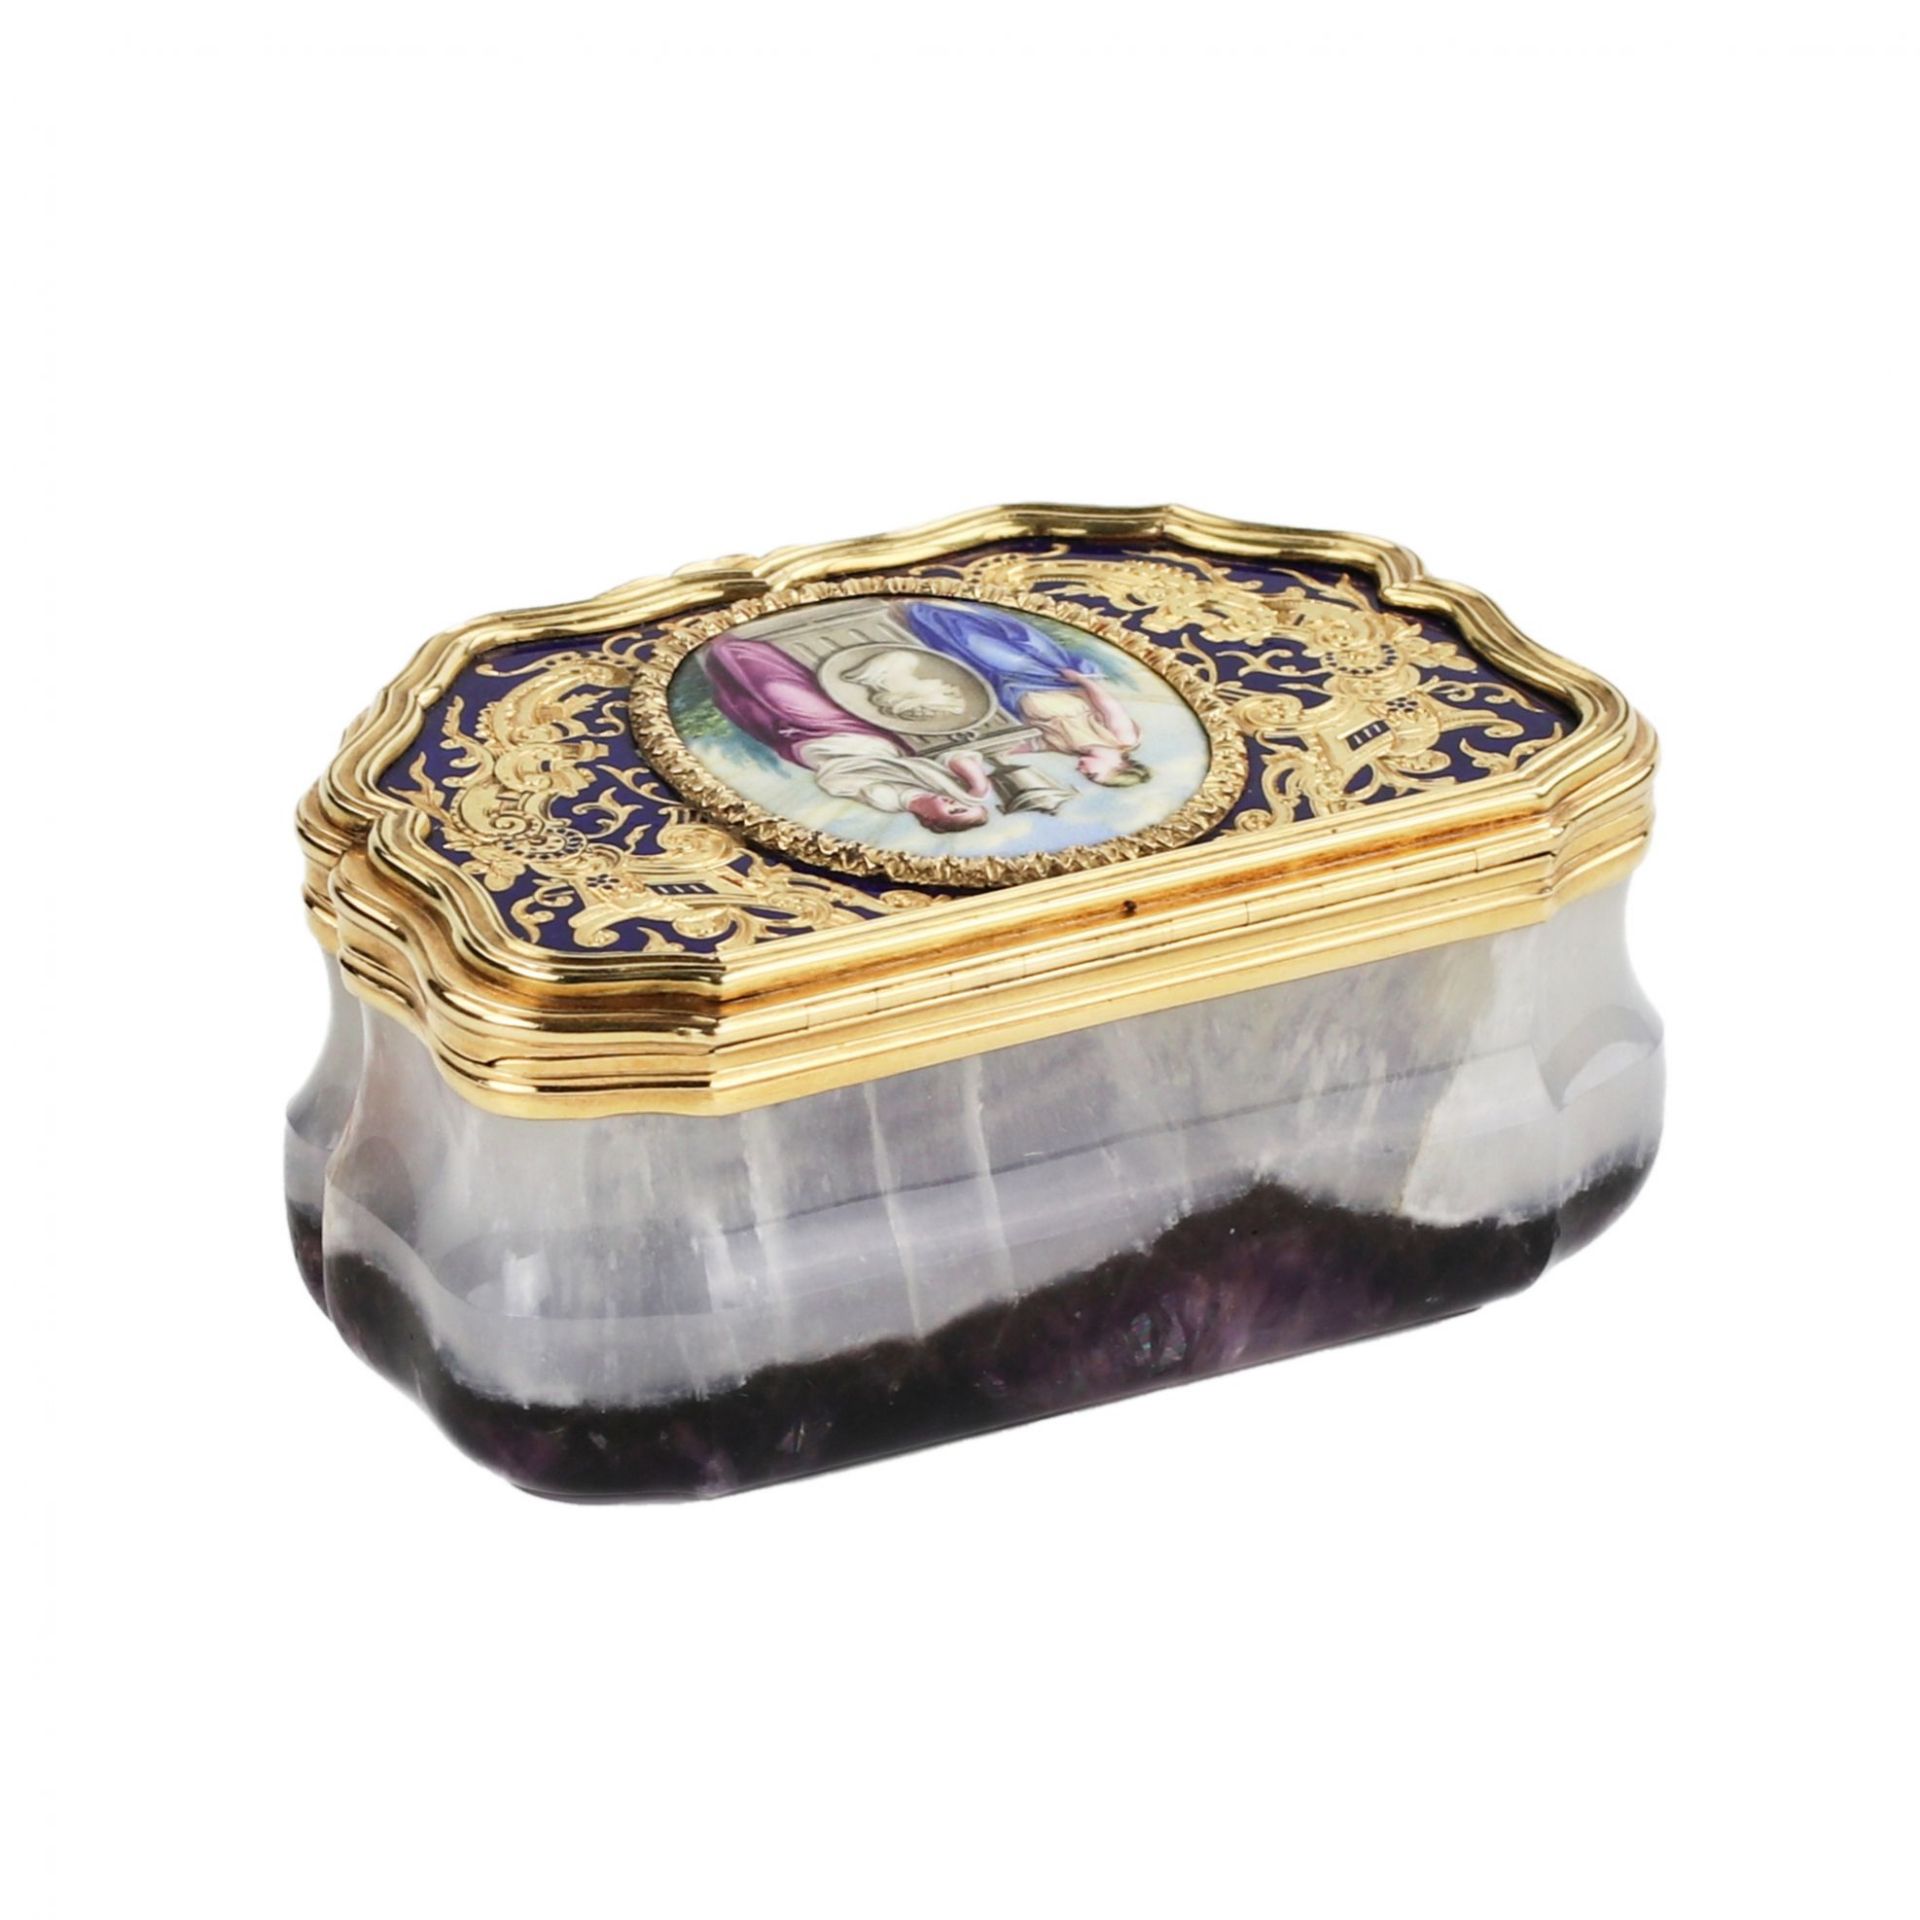 Unique snuff box made of solid amethyst with gold. I. Keibel, St. Petersburg, 19th century. - Bild 4 aus 12